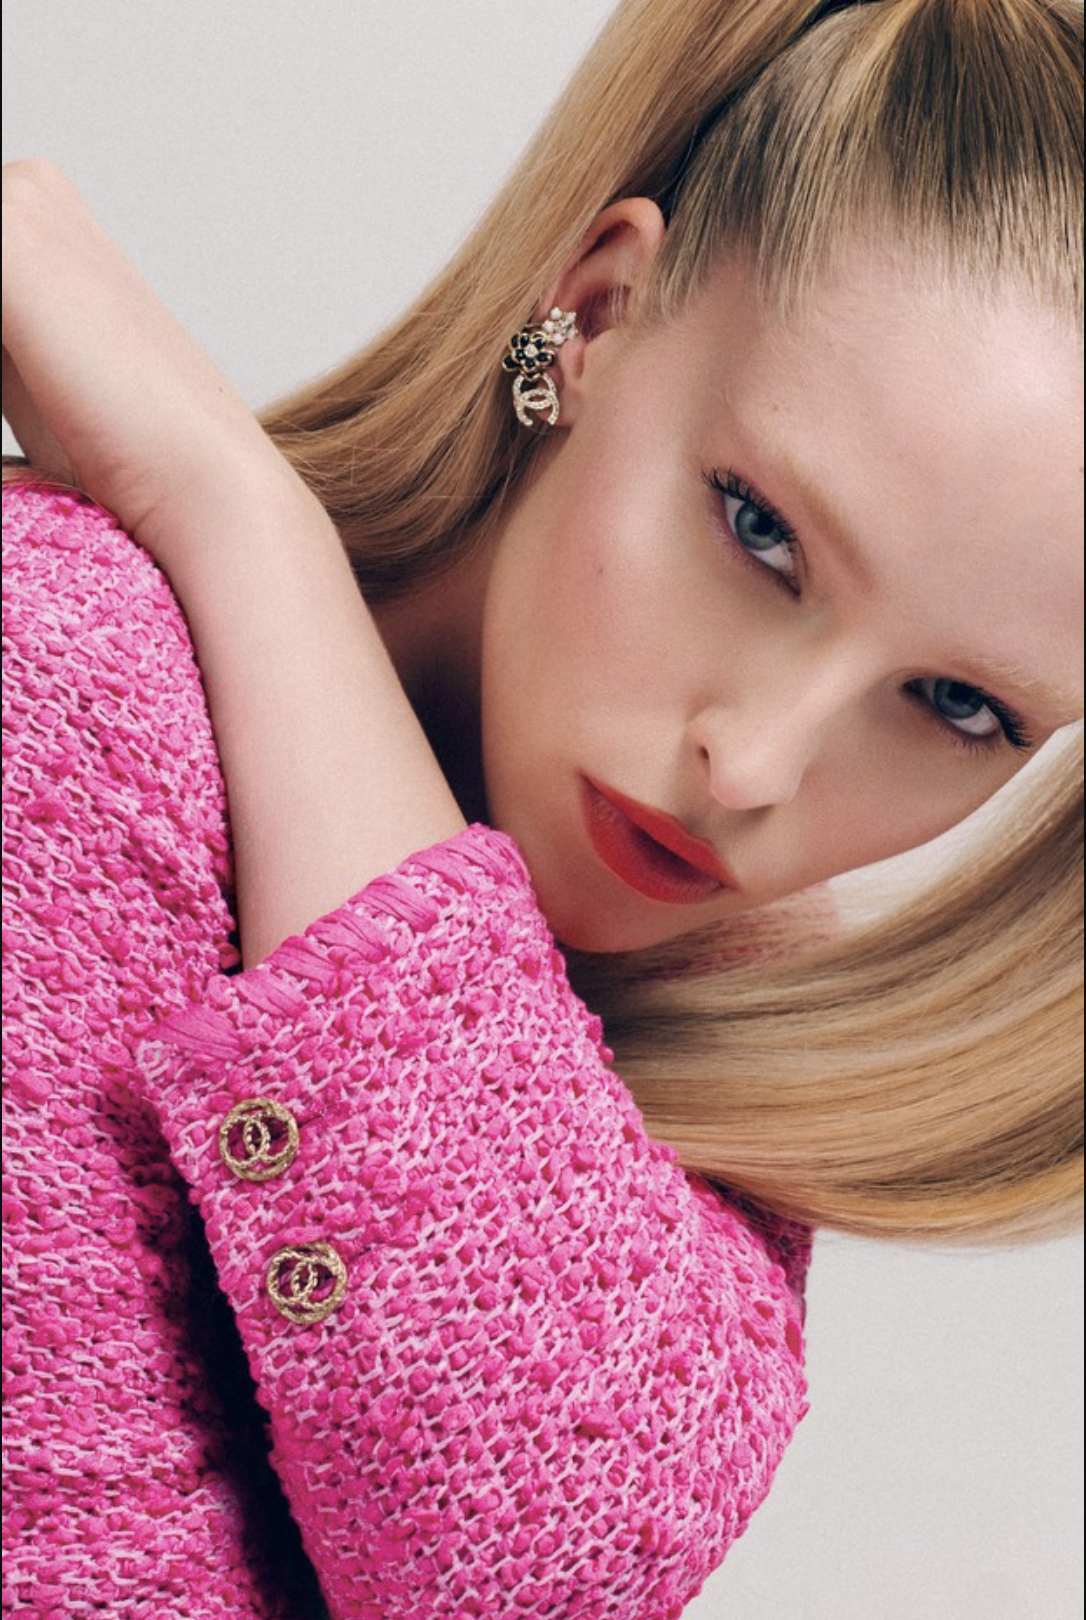 Abby-Champion-by-Hick-Duarte-Vogue-Brazil-January-2021-1.png